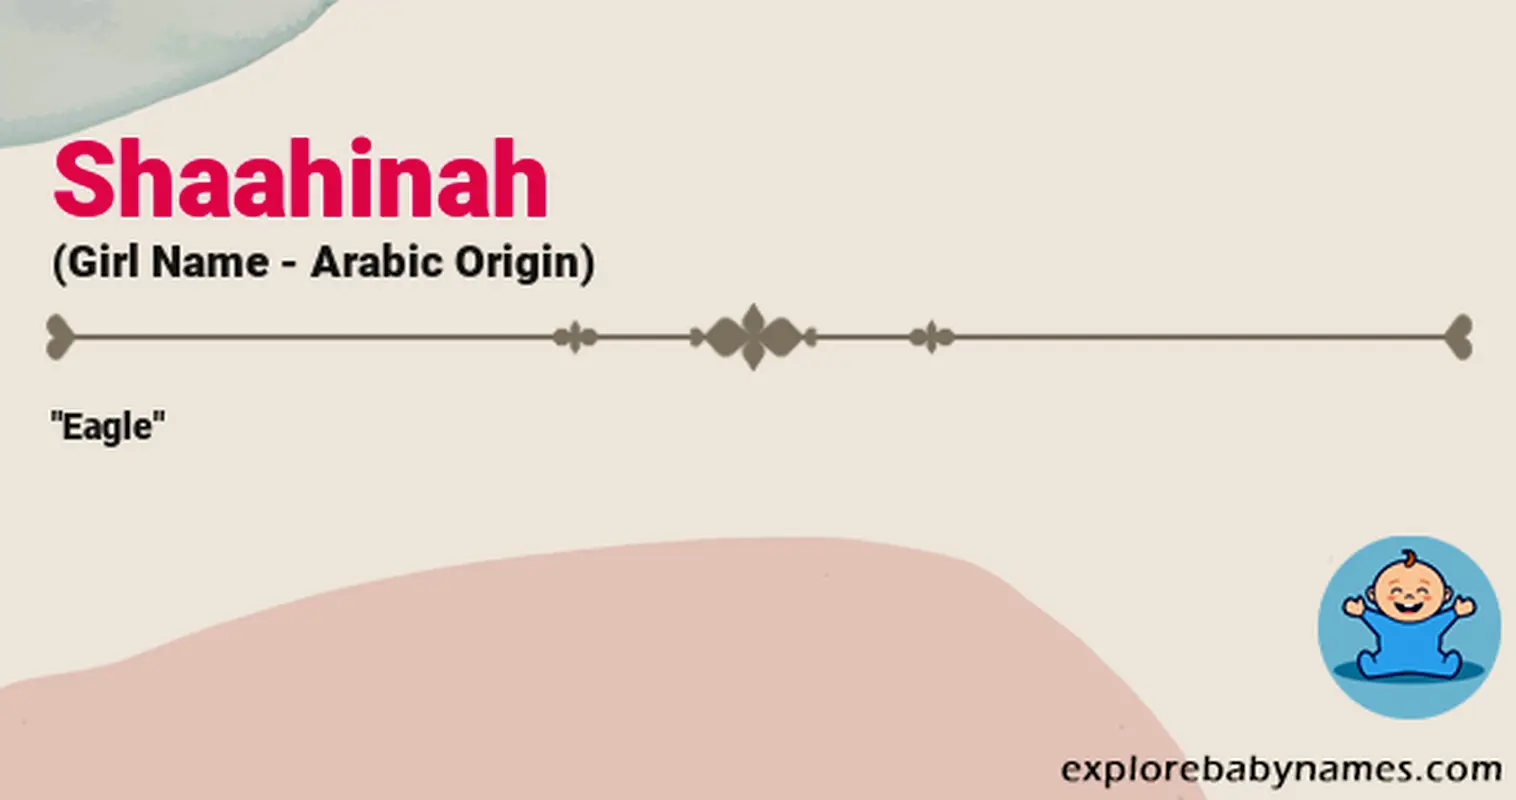 Meaning of Shaahinah